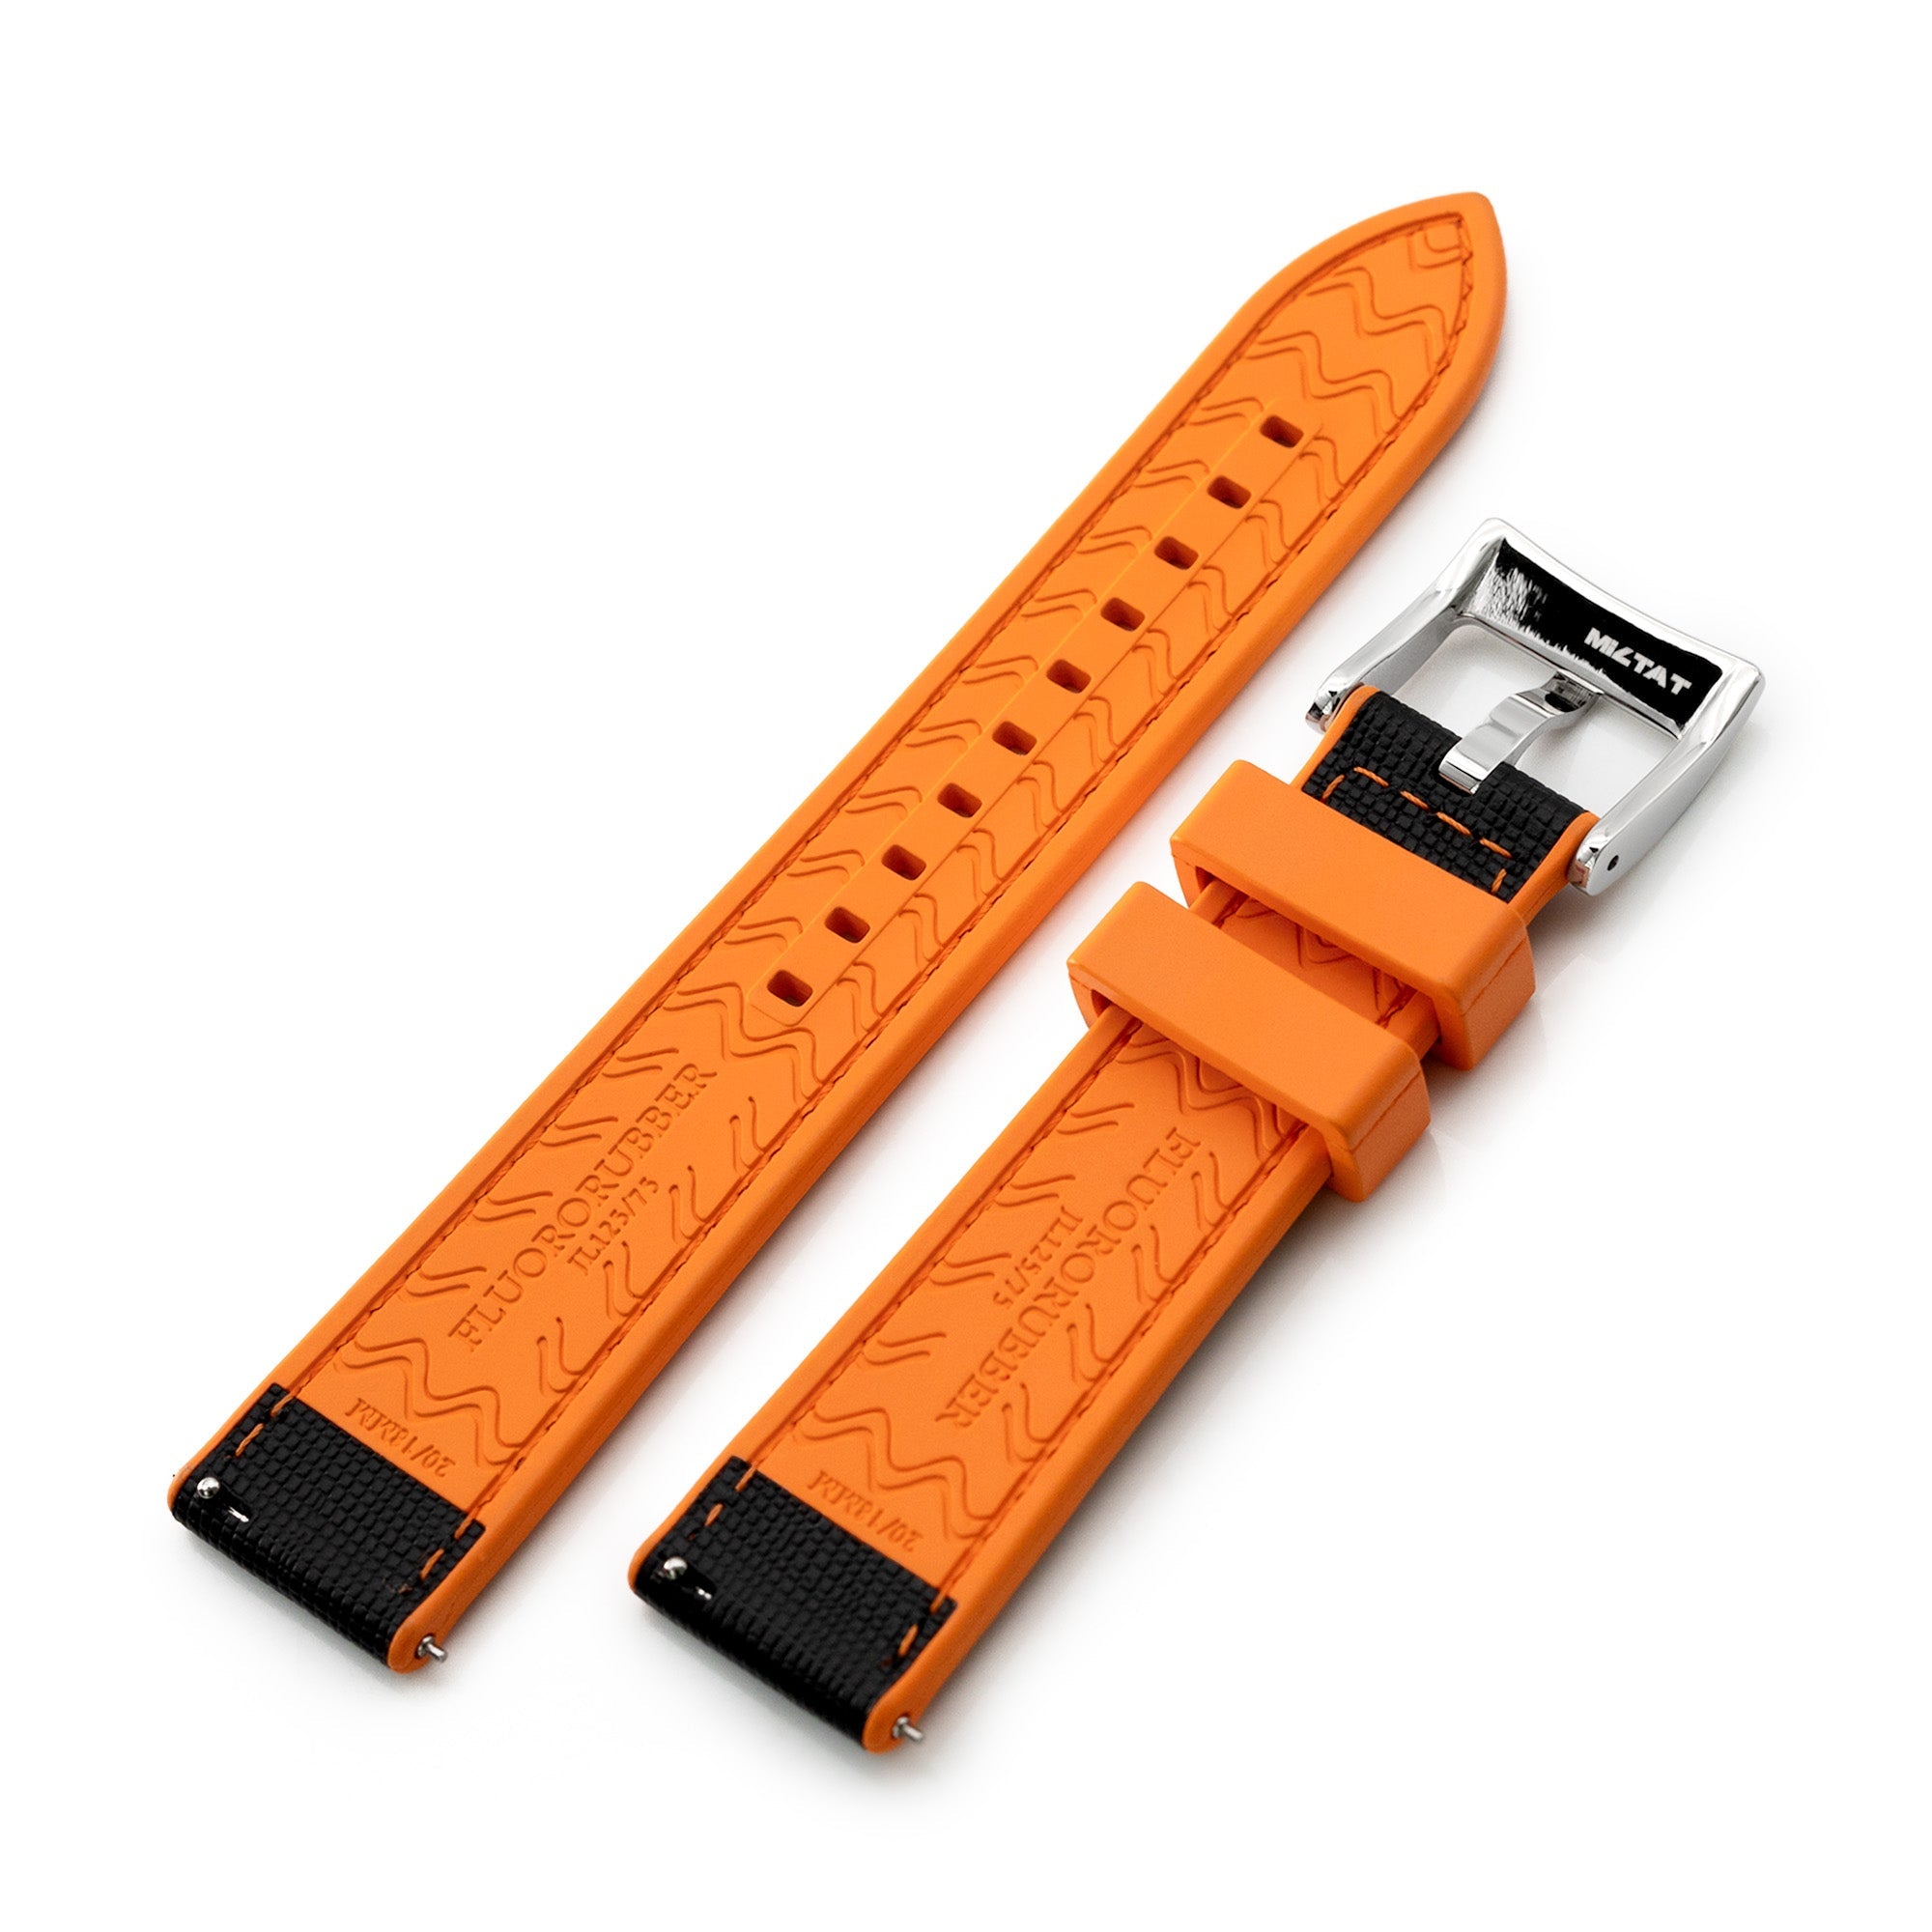 20mm Black / Orange Quick Release Leather-FKM Rubber Sports Watch Strap Strapcode Watch Bands